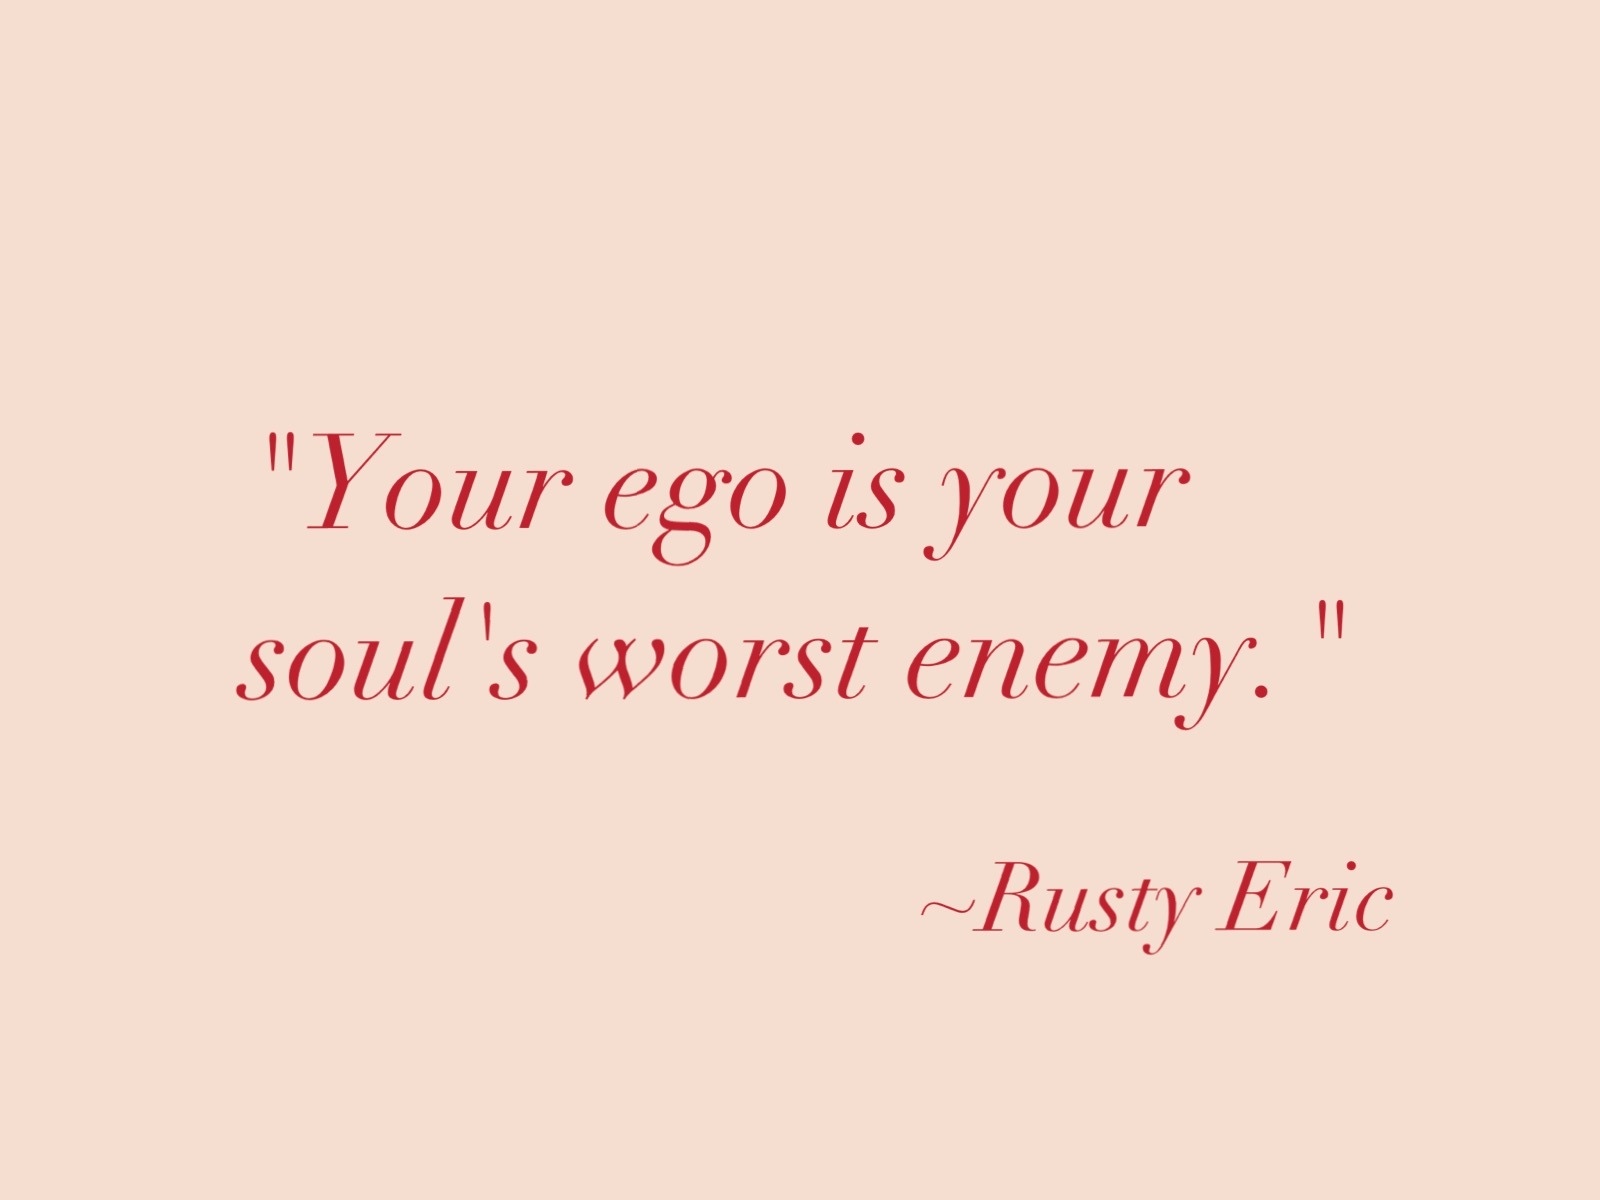 Your ego is your soul's worst enemy. Rusty Eric